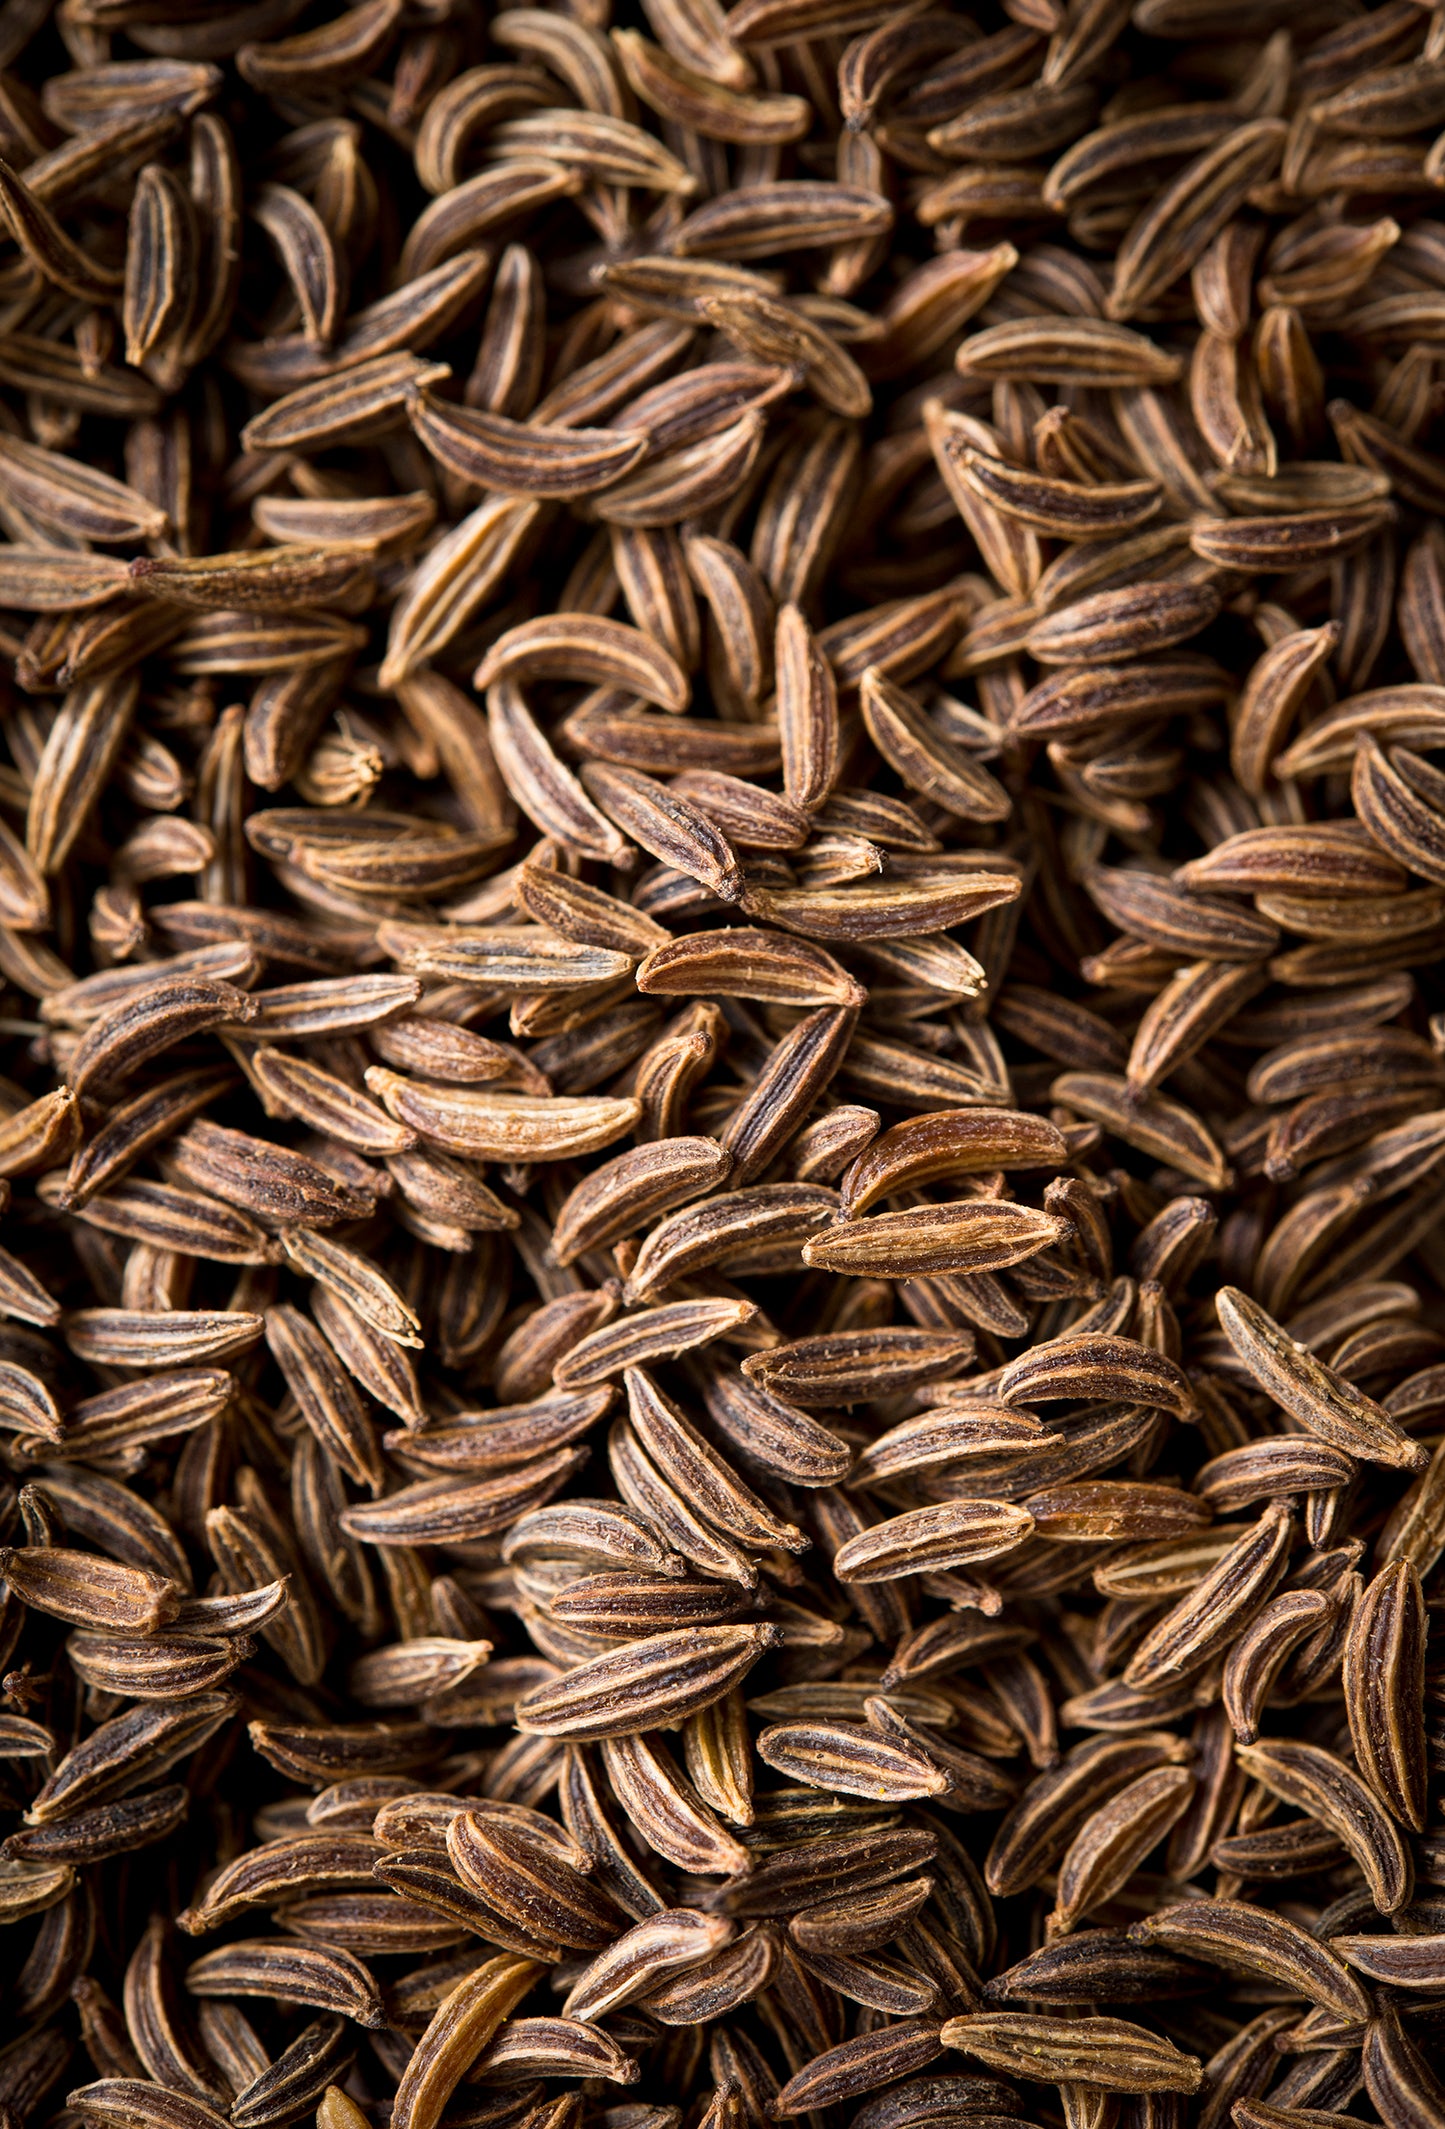 Caraway Seed “Superior” Oil